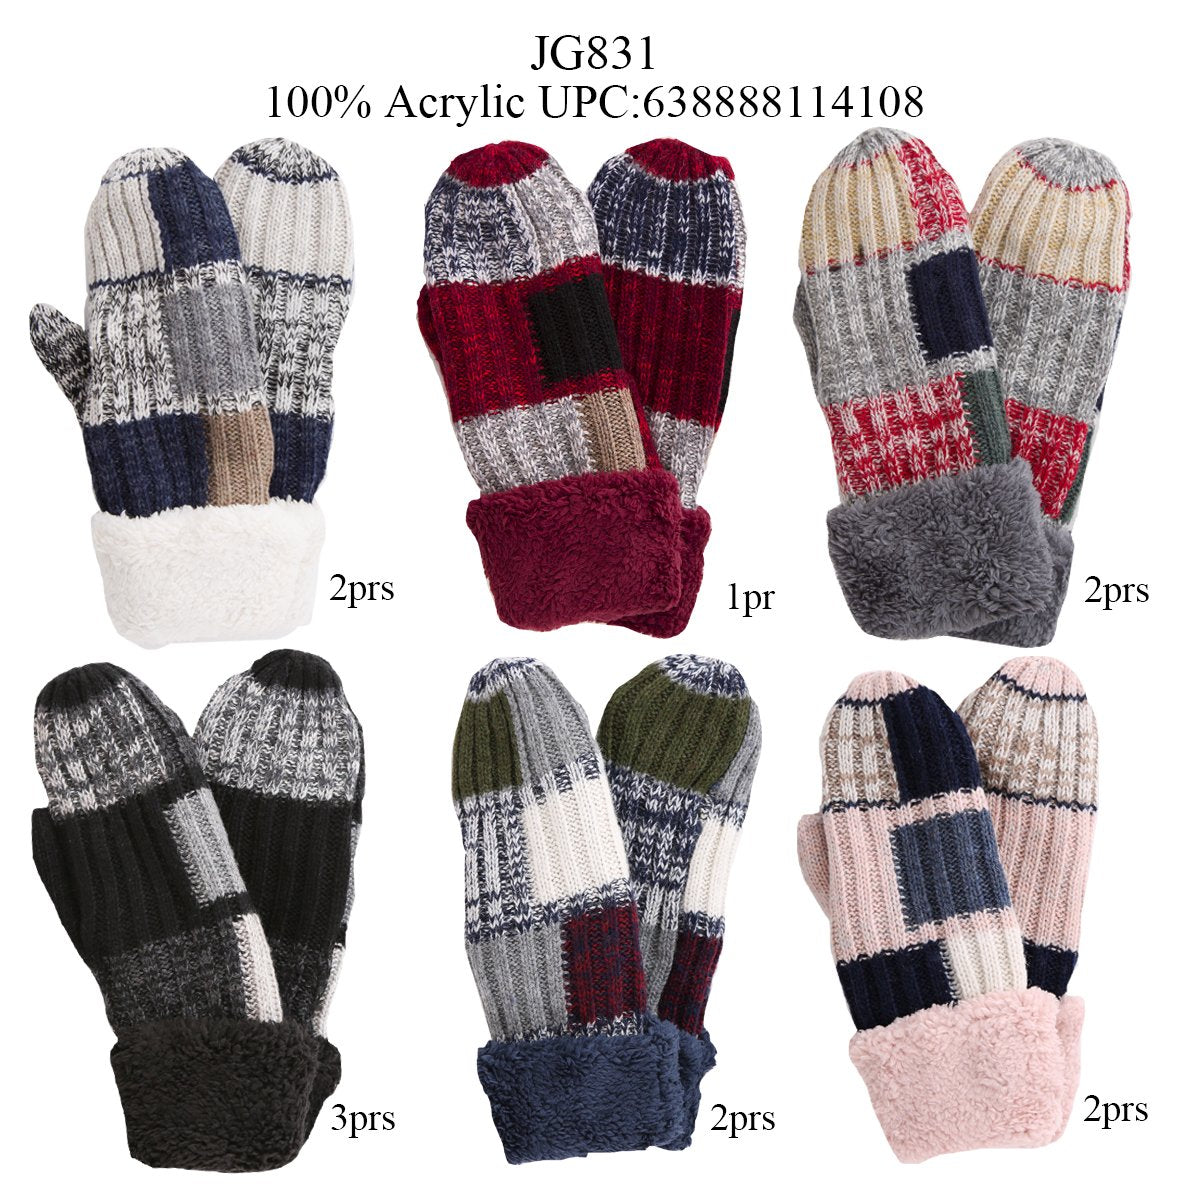 Color-Blocked Knitted Mittens W/ Fleece Cuffs - 12Pc Set